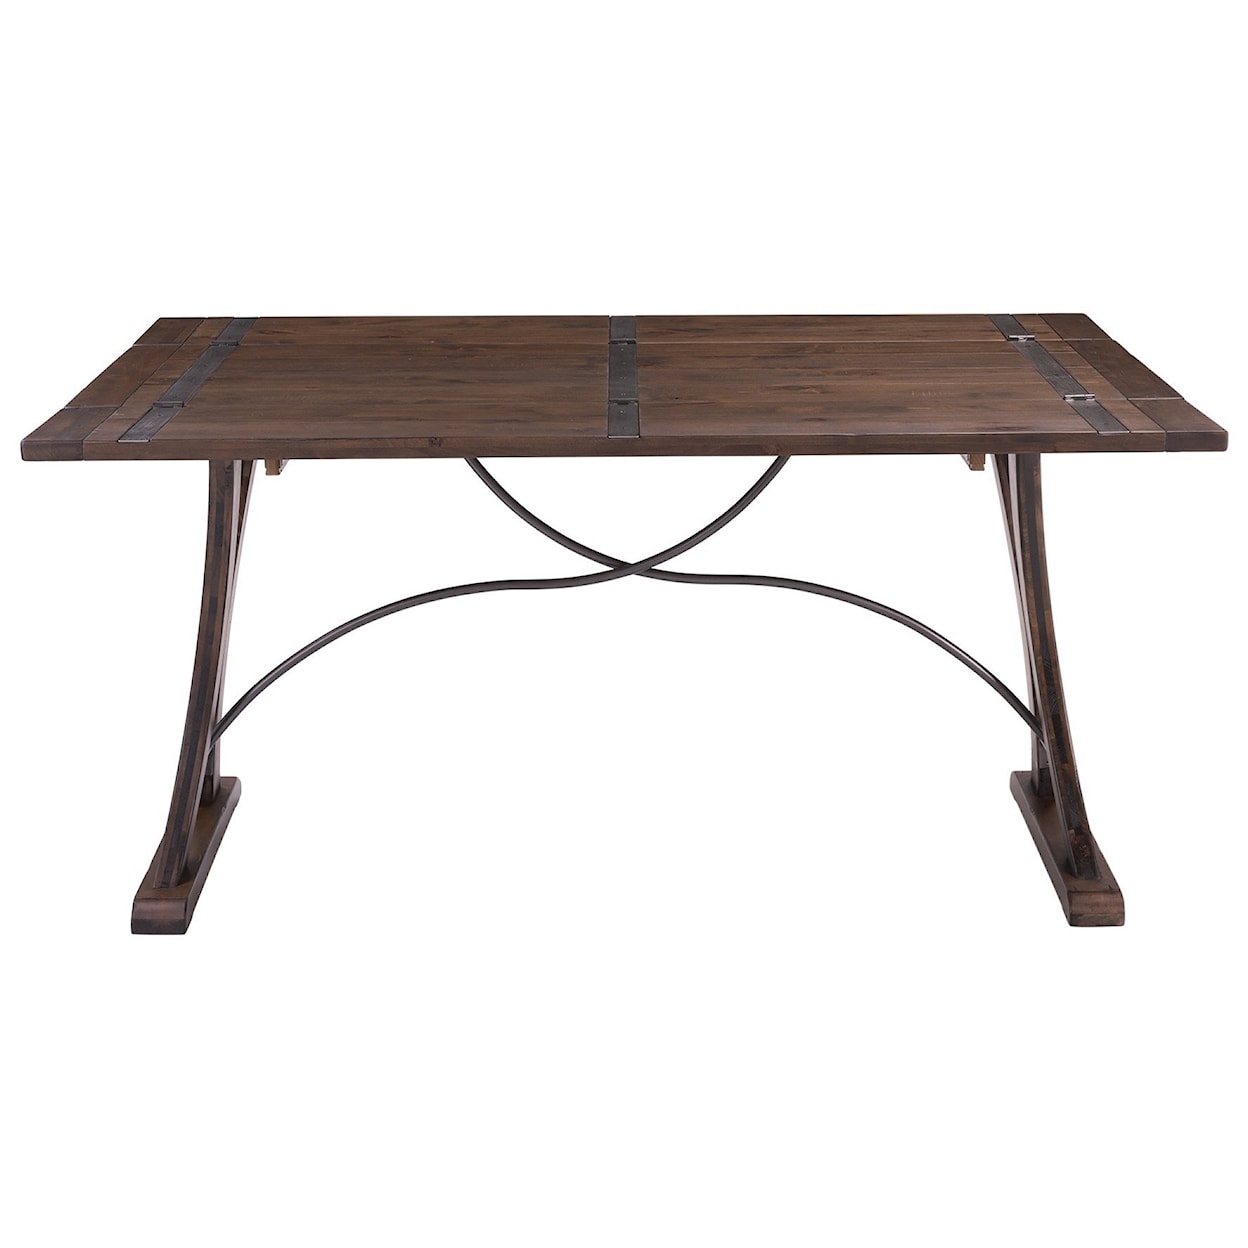 Elements International New Bedford Folding Top Dining Table